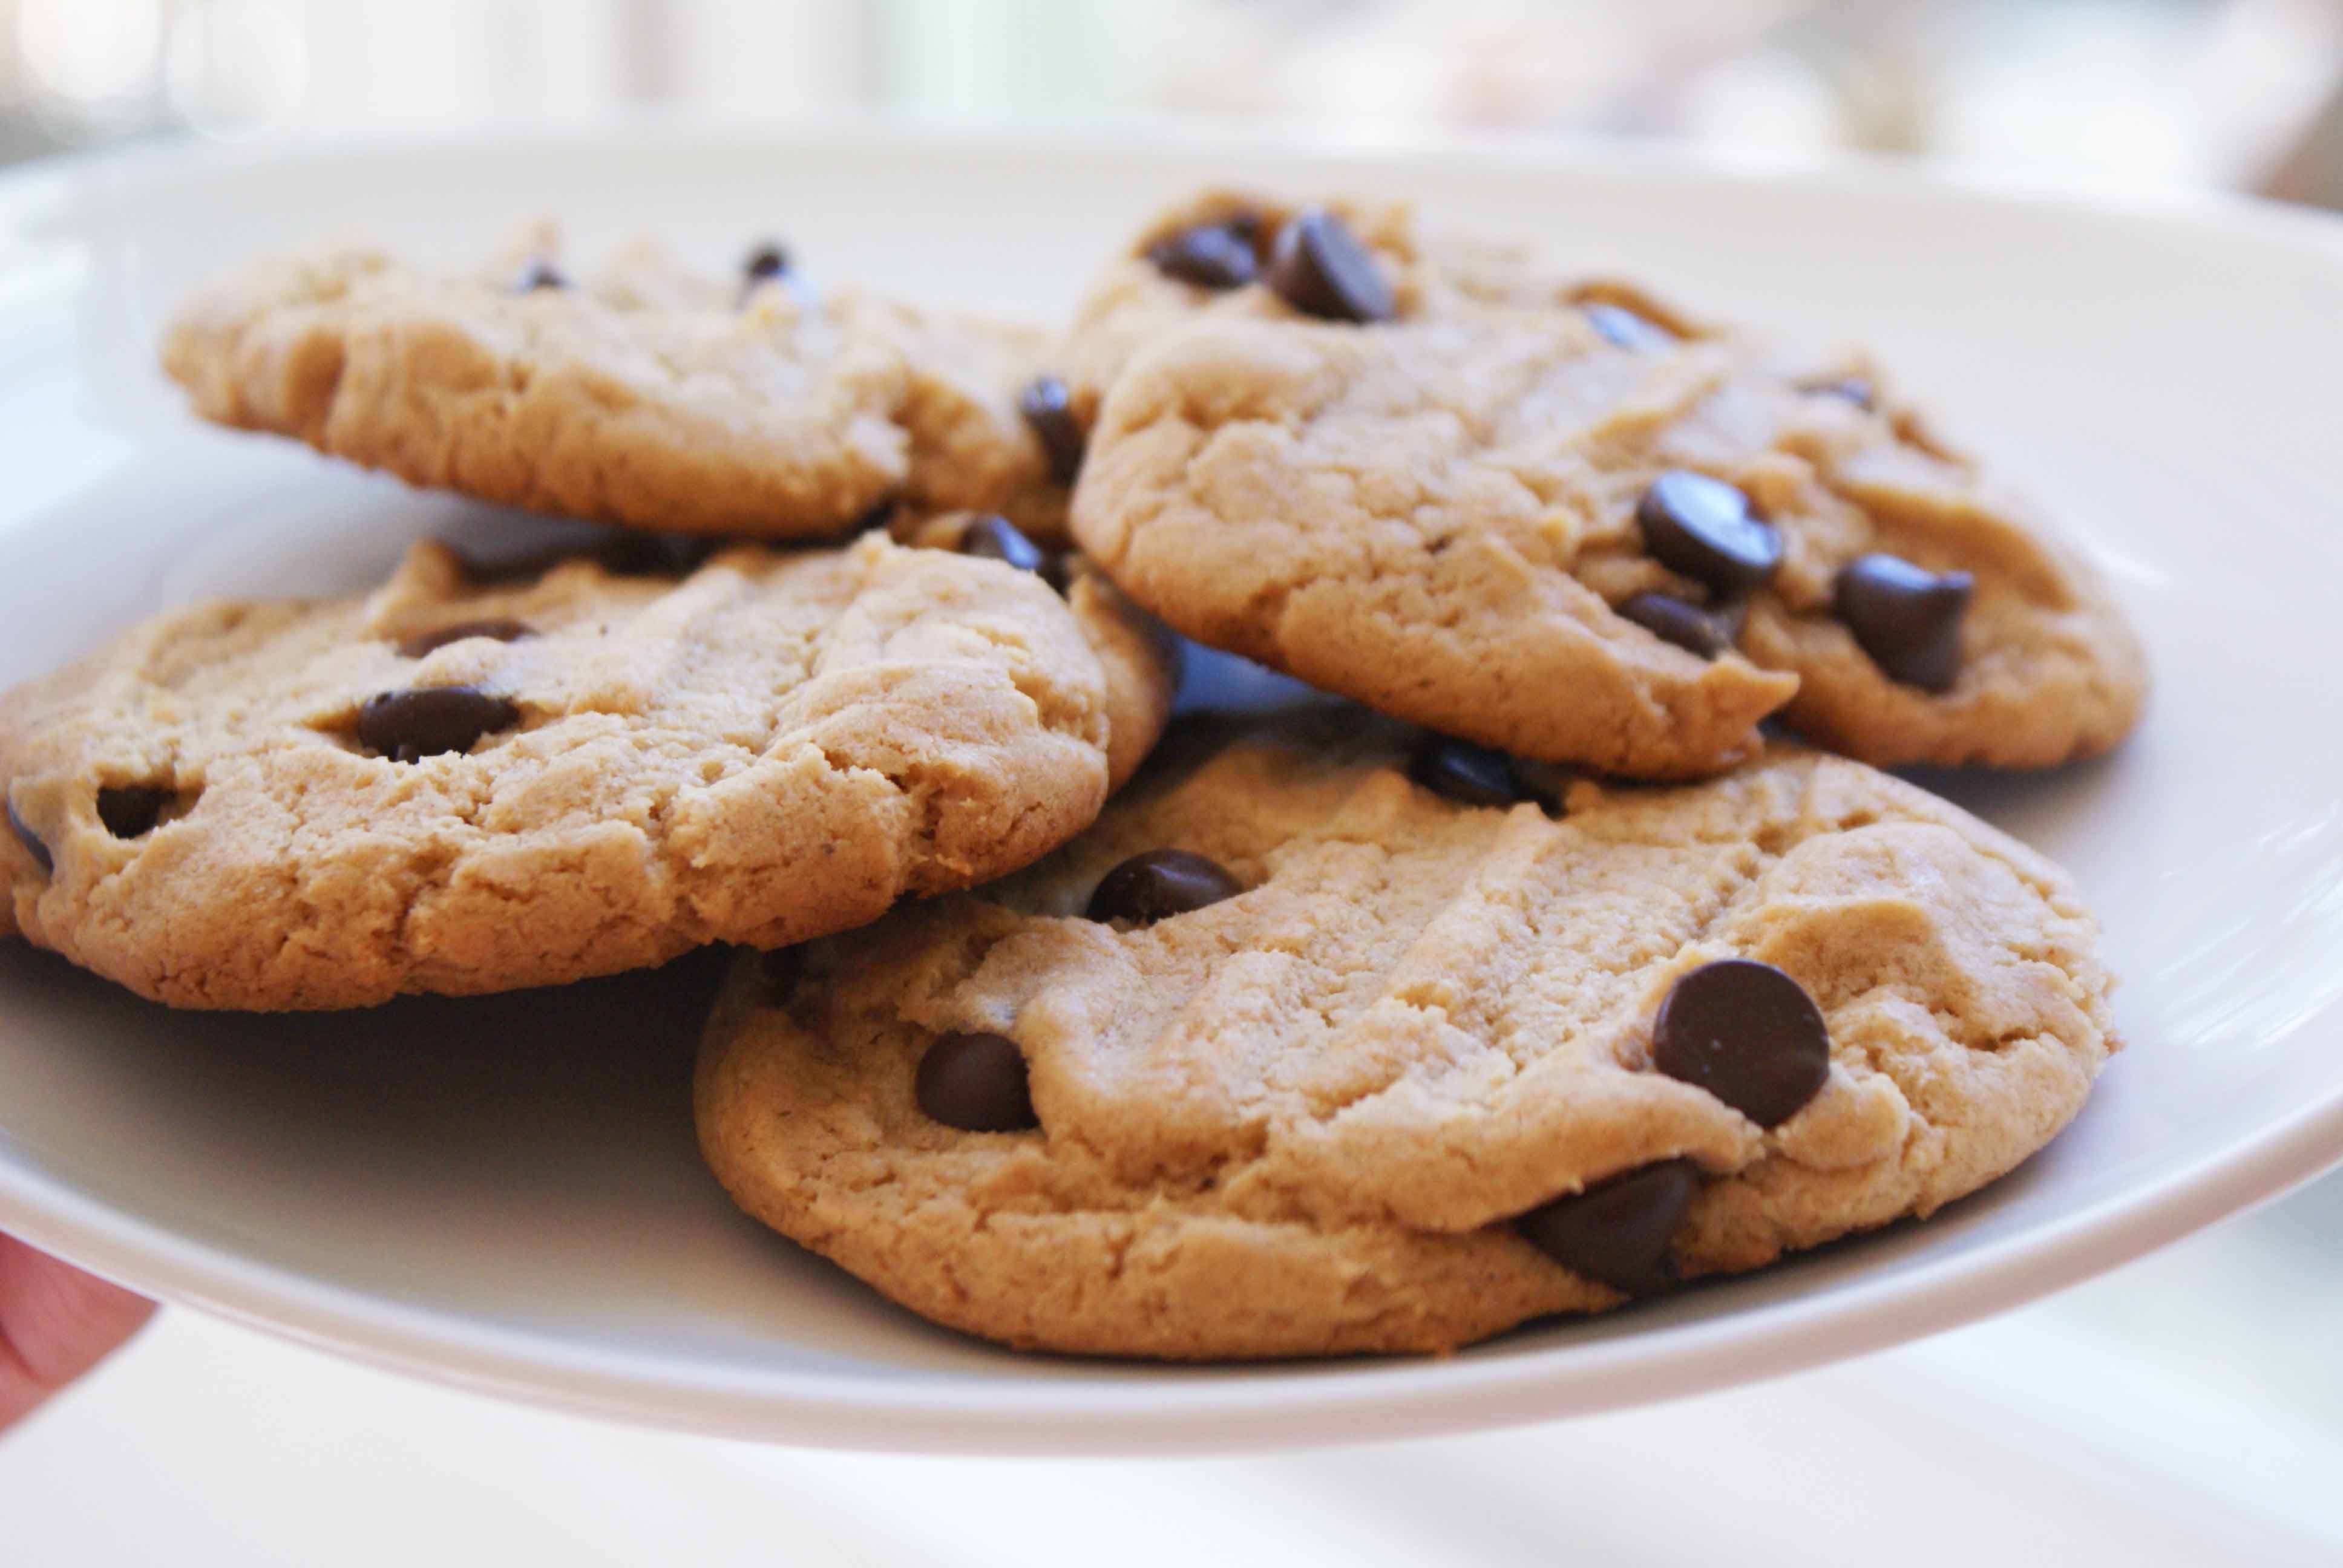 Chocolate Chip Cookie Wallpaper High Quality